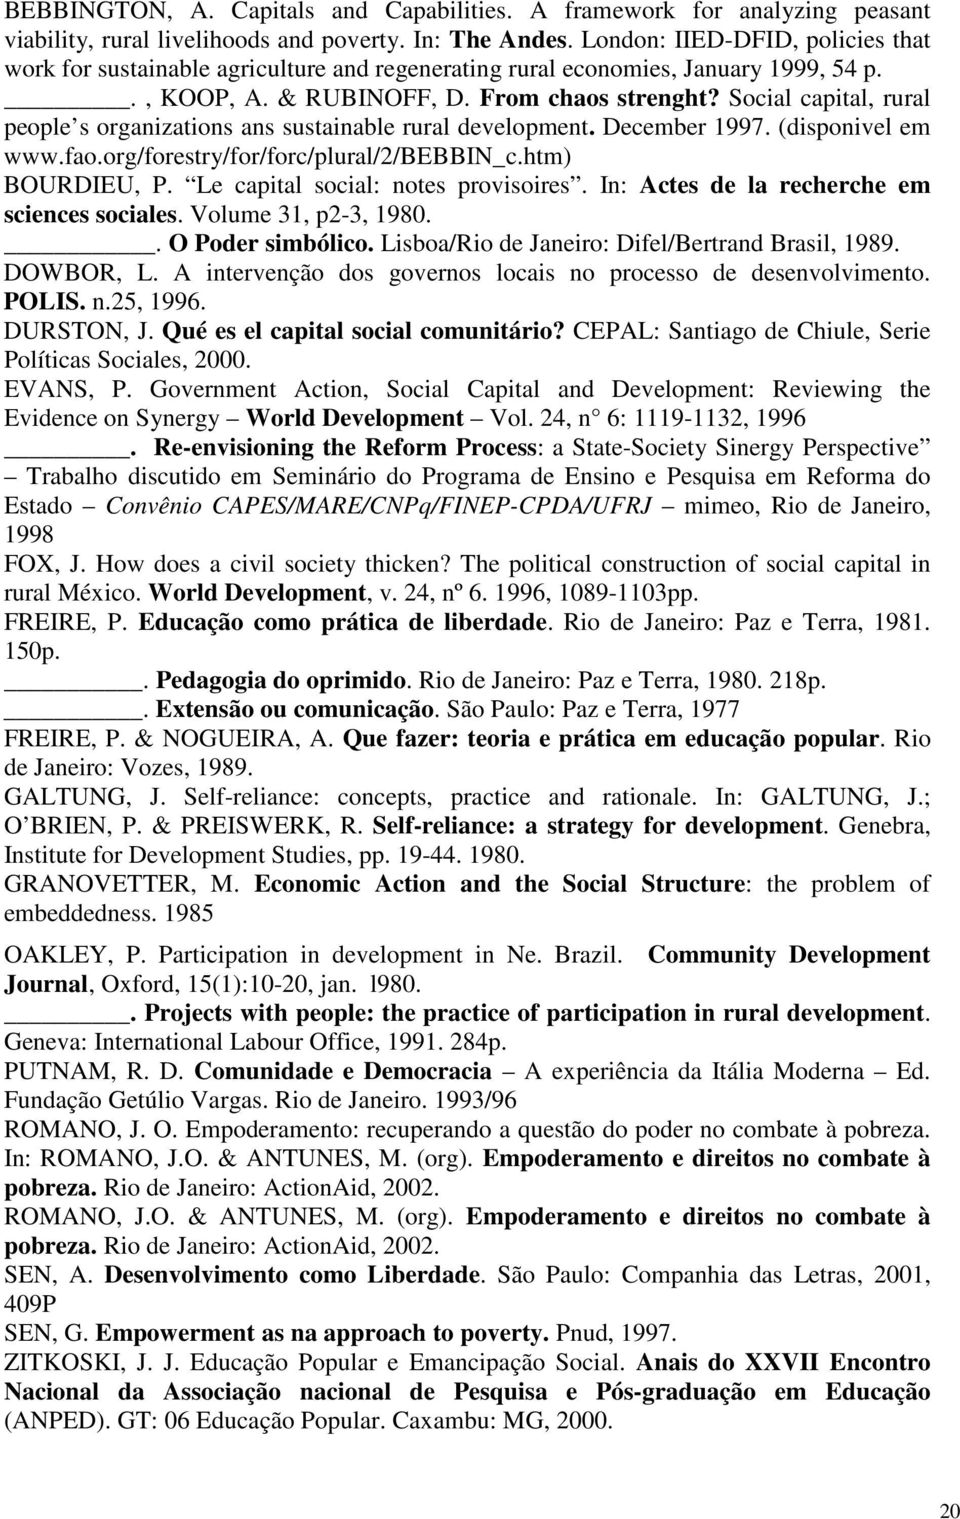 Social capital, rural people s organizations ans sustainable rural development. December 1997. (disponivel em www.fao.org/forestry/for/forc/plural/2/bebbin_c.htm) BOURDIEU, P.